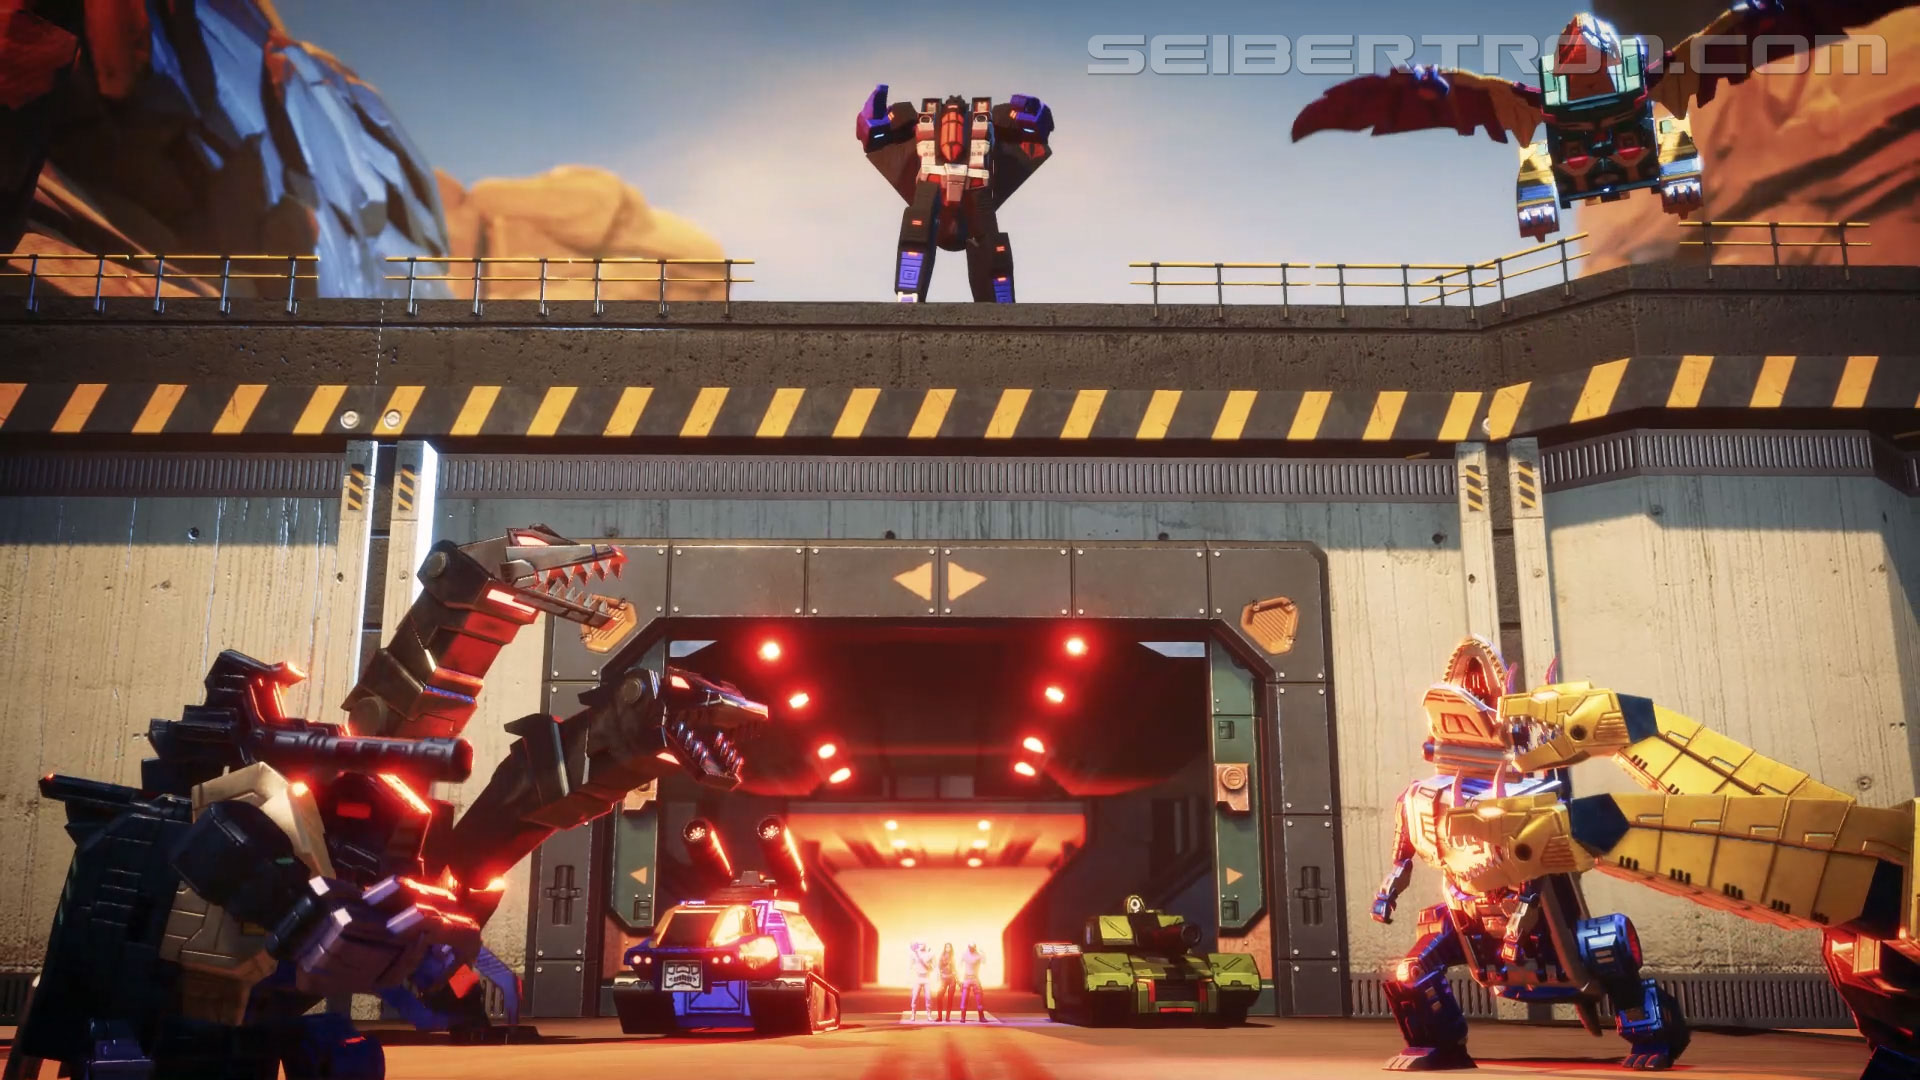 Transformers News: GI Joe and the Autobots battle Cobra and the Decepticons in Transformers Earth Wars game